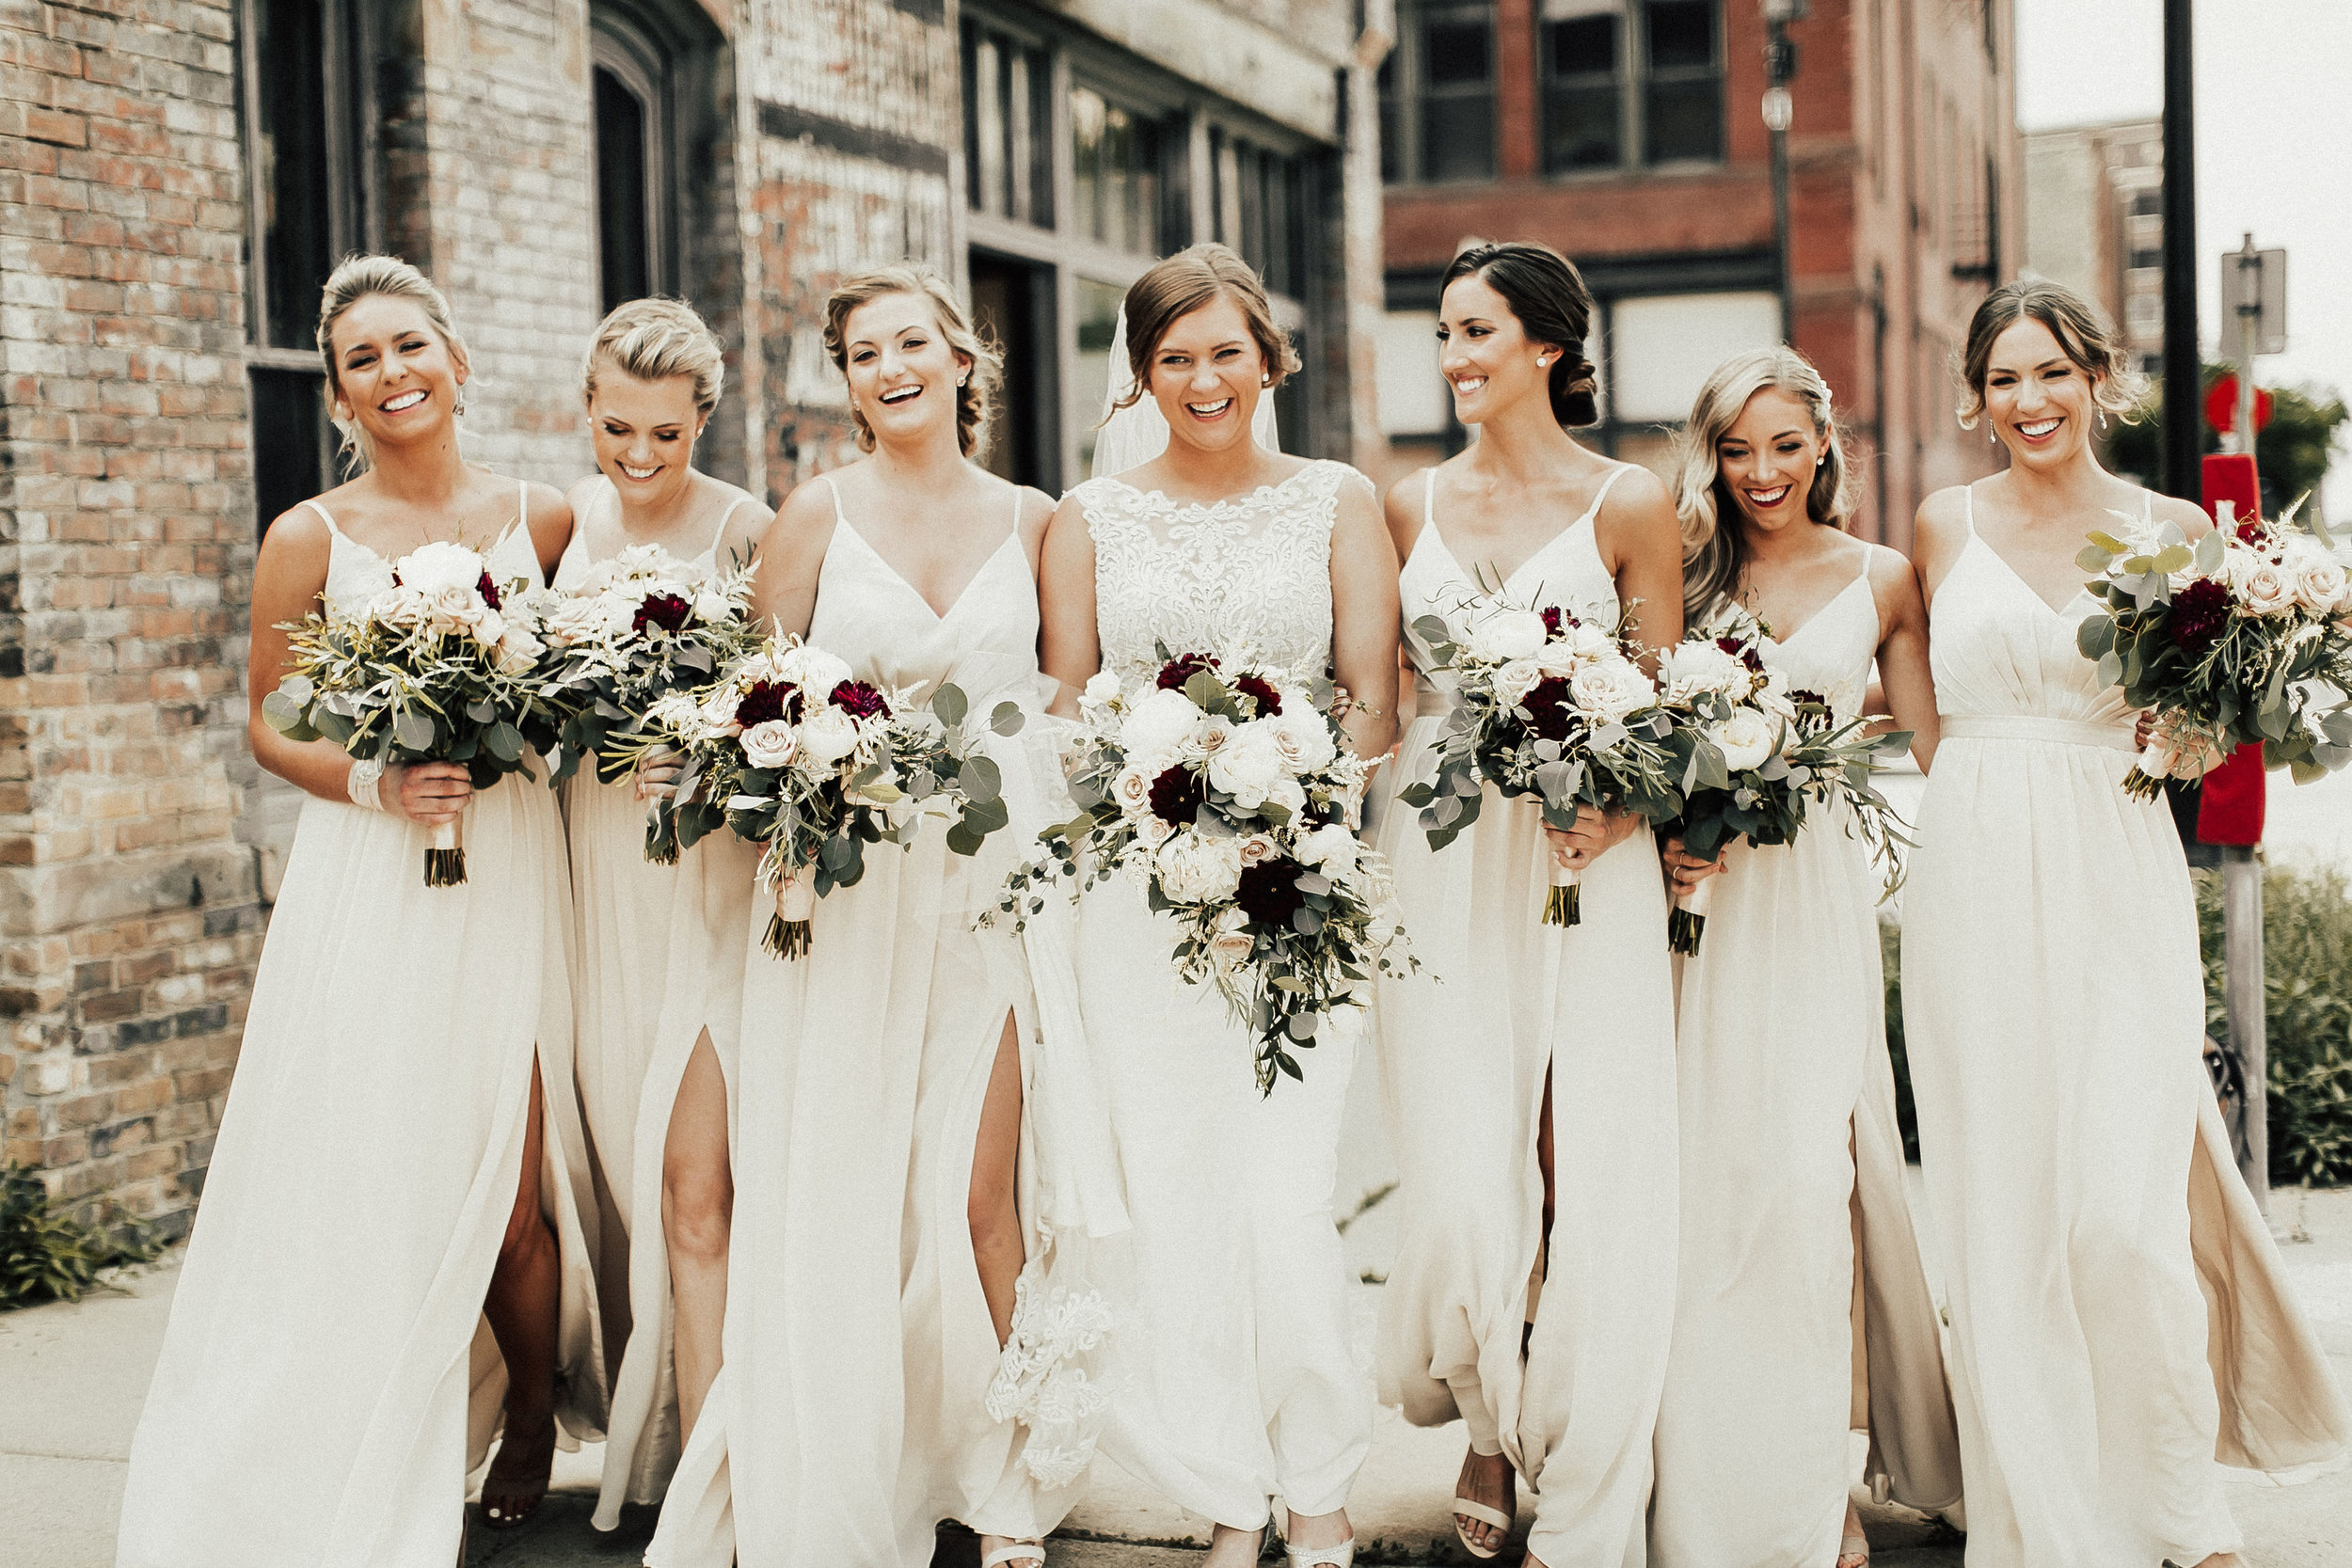 From Left to Right: Hayley Erstad (matron of honor), Brooke Harms (bridesmaid, sister of the groom), Sami Harms (bridesmaid, sister of the groom), Katie Harms (BRIDE), Kristie Miller (bridesmaid), Ali Wolff (maid of honor) Erika Dahlen (bridesmaid)